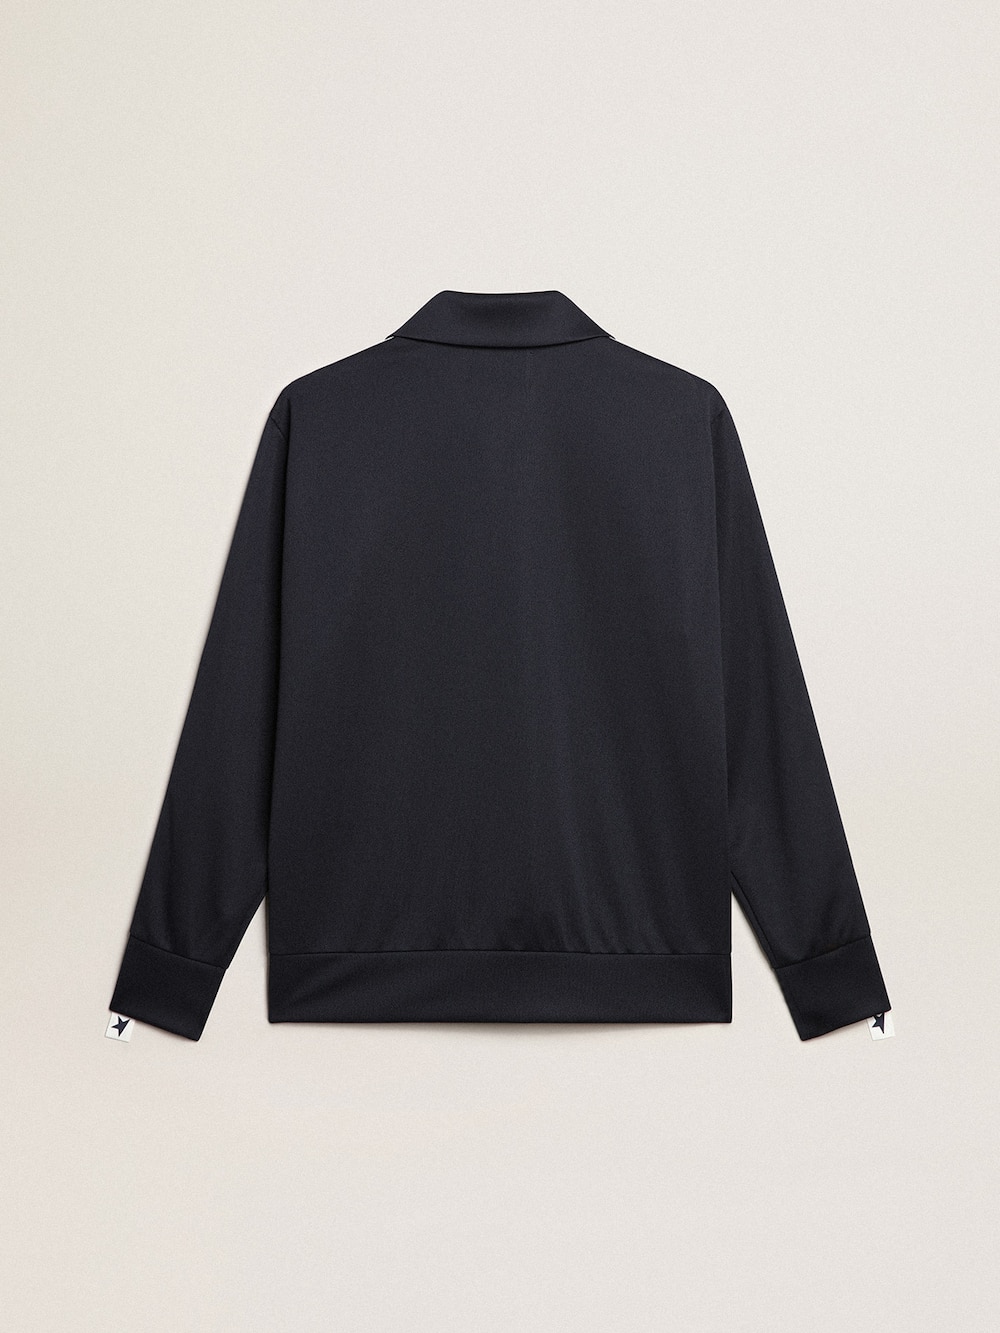 Golden Goose - Dark blue sweatshirt with white strip and contrasting blue stars in 